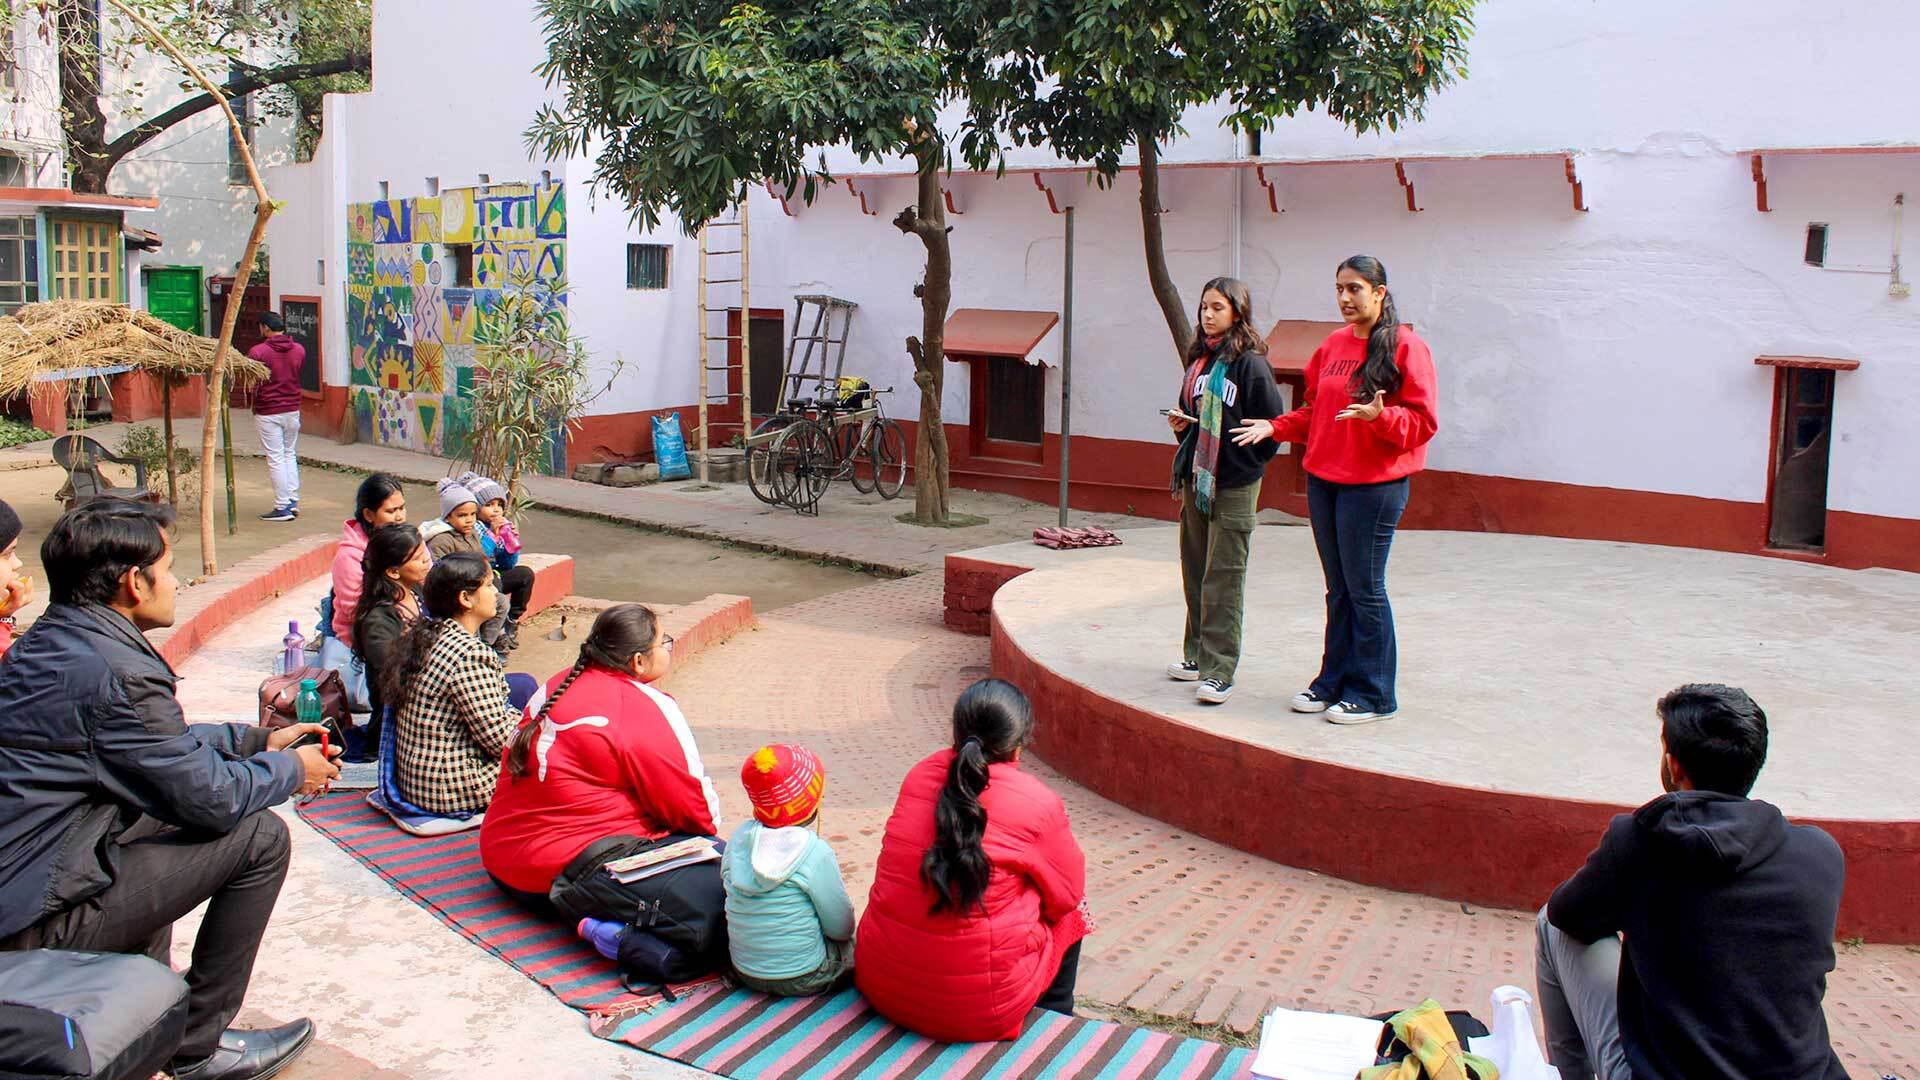 Two women stand on a stage and talk to an audience outdoors